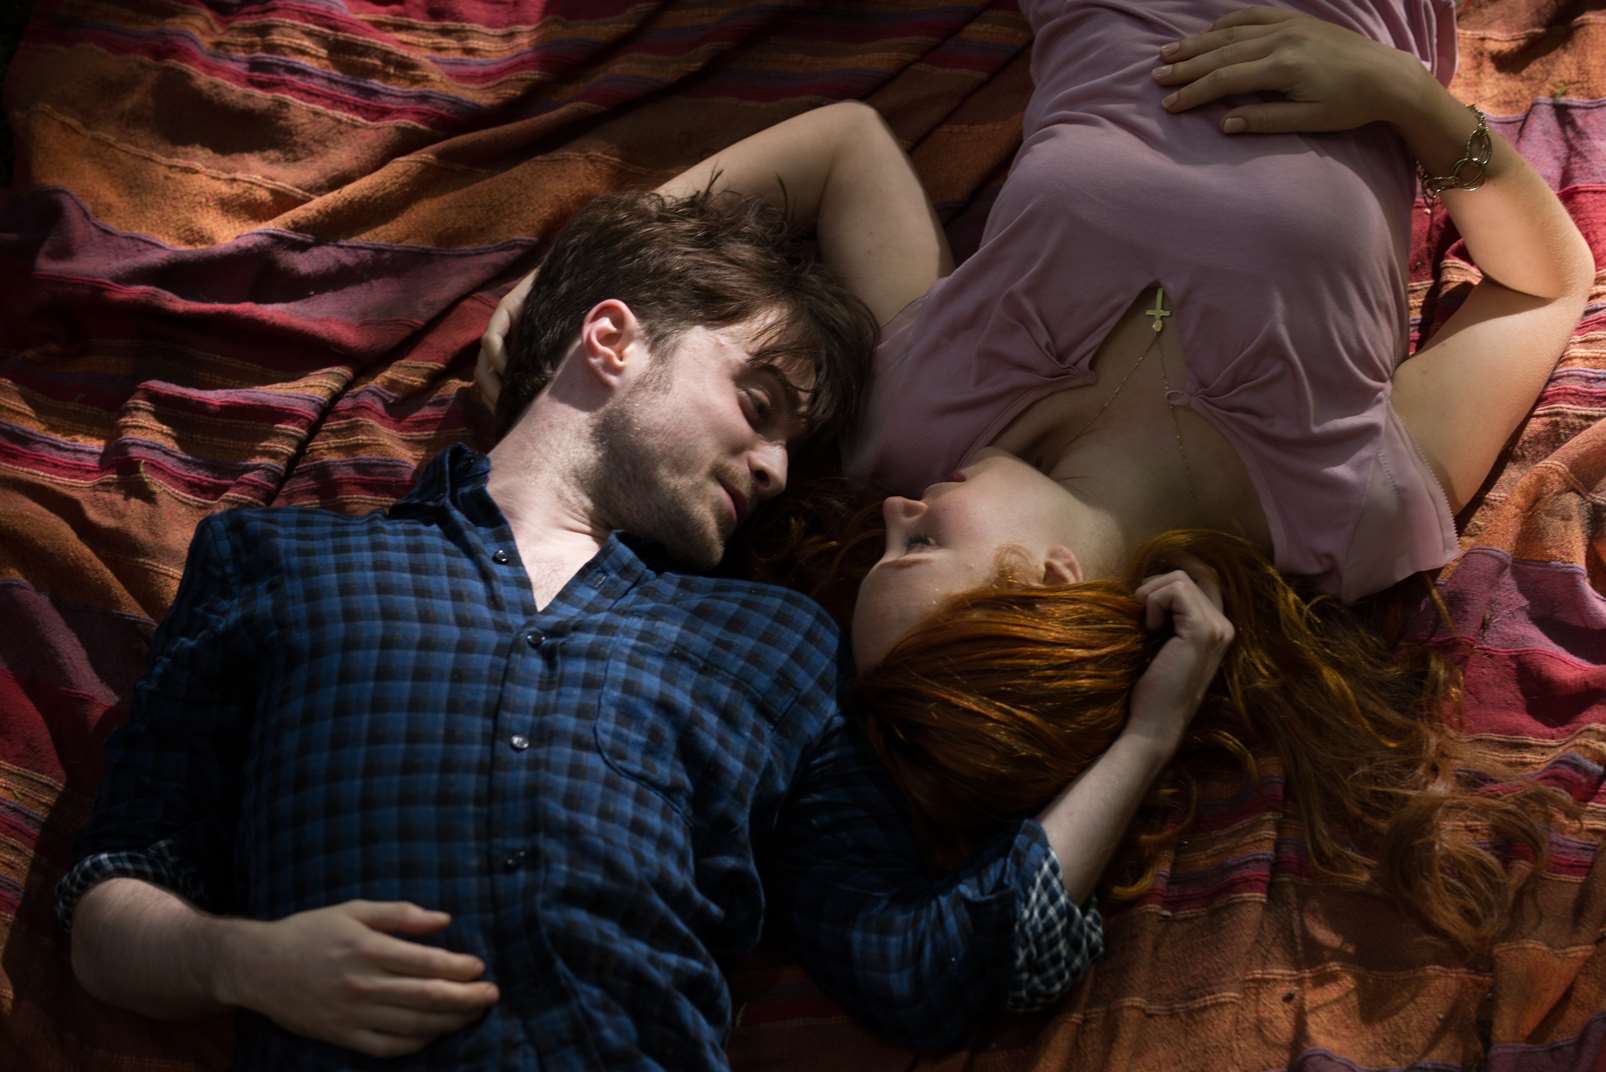 Daniel Radcliffe as Ig Parrish and Juno Temple as Merrin Williams, in Horns. Picture: PA Photo/Handout/Lionsgate